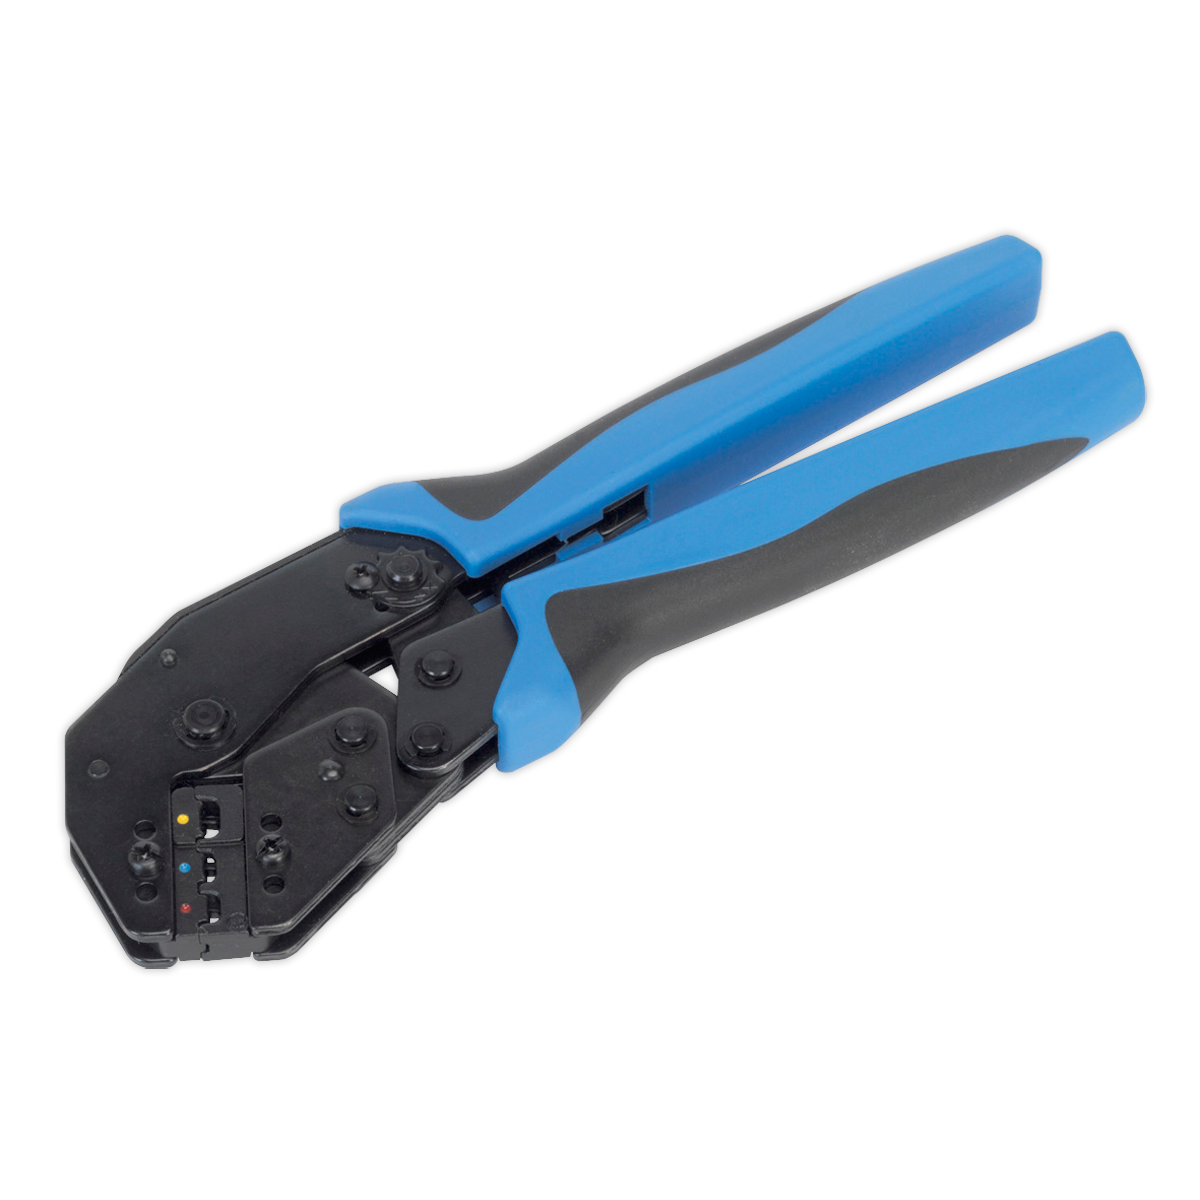 Ratchet Crimping Tool Angled Head Insulated Terminals - AK3863 - Farming Parts